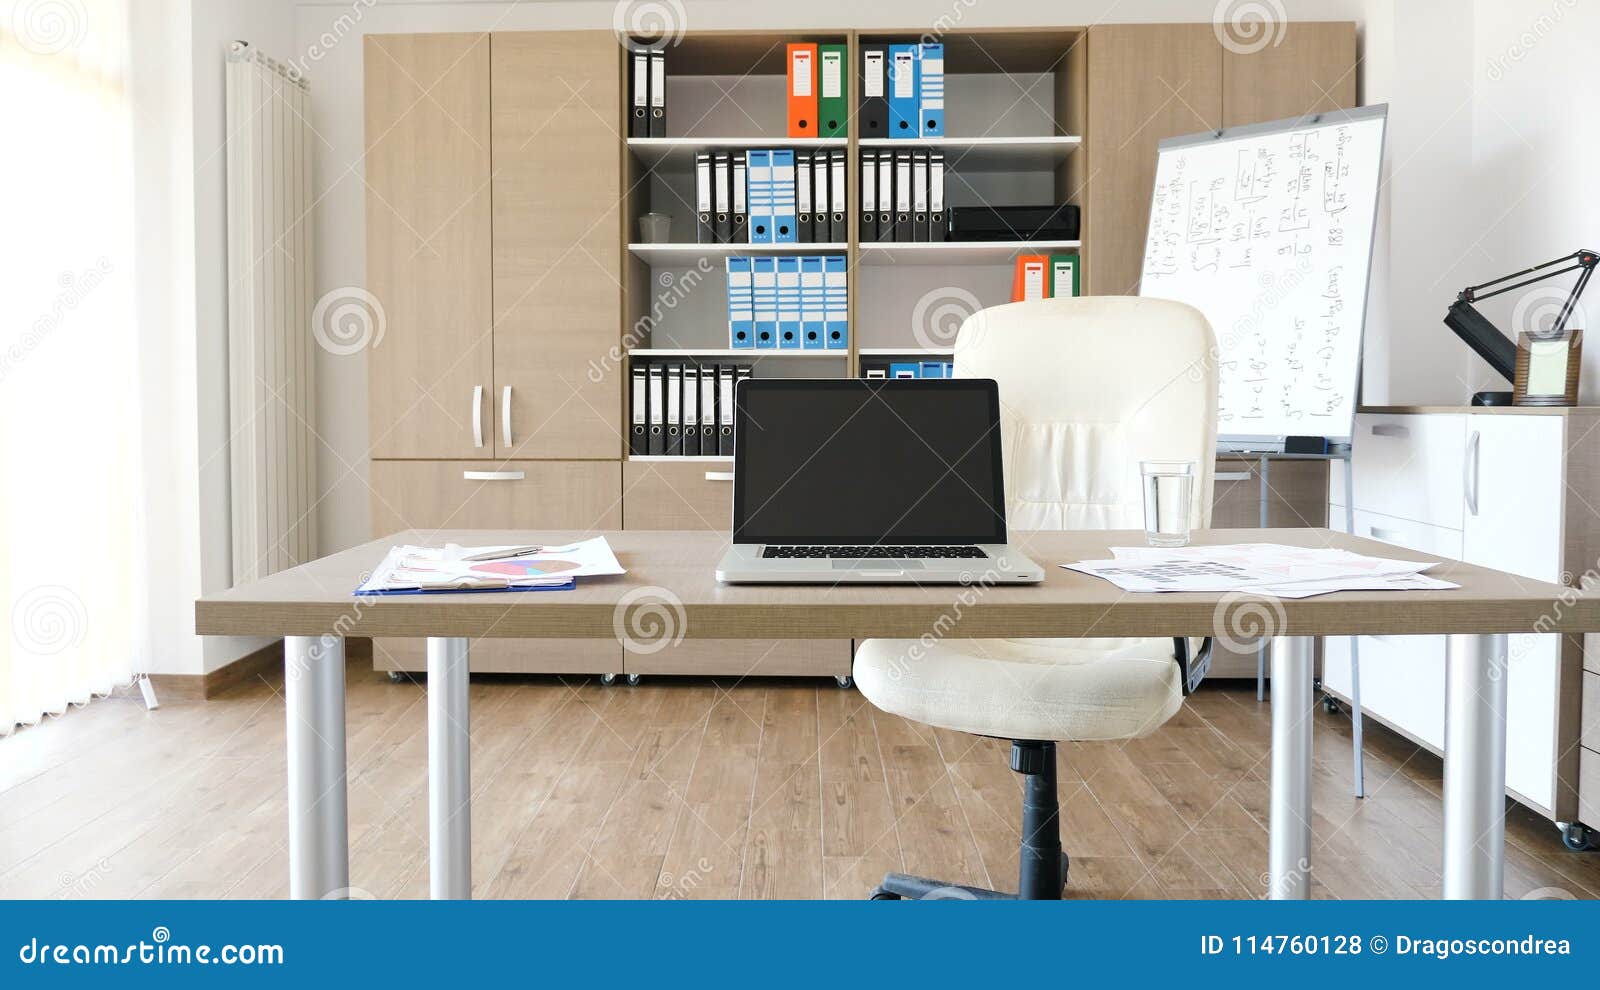 A Modern Laptop On A Desk In The Middle Of Modern Empty Office